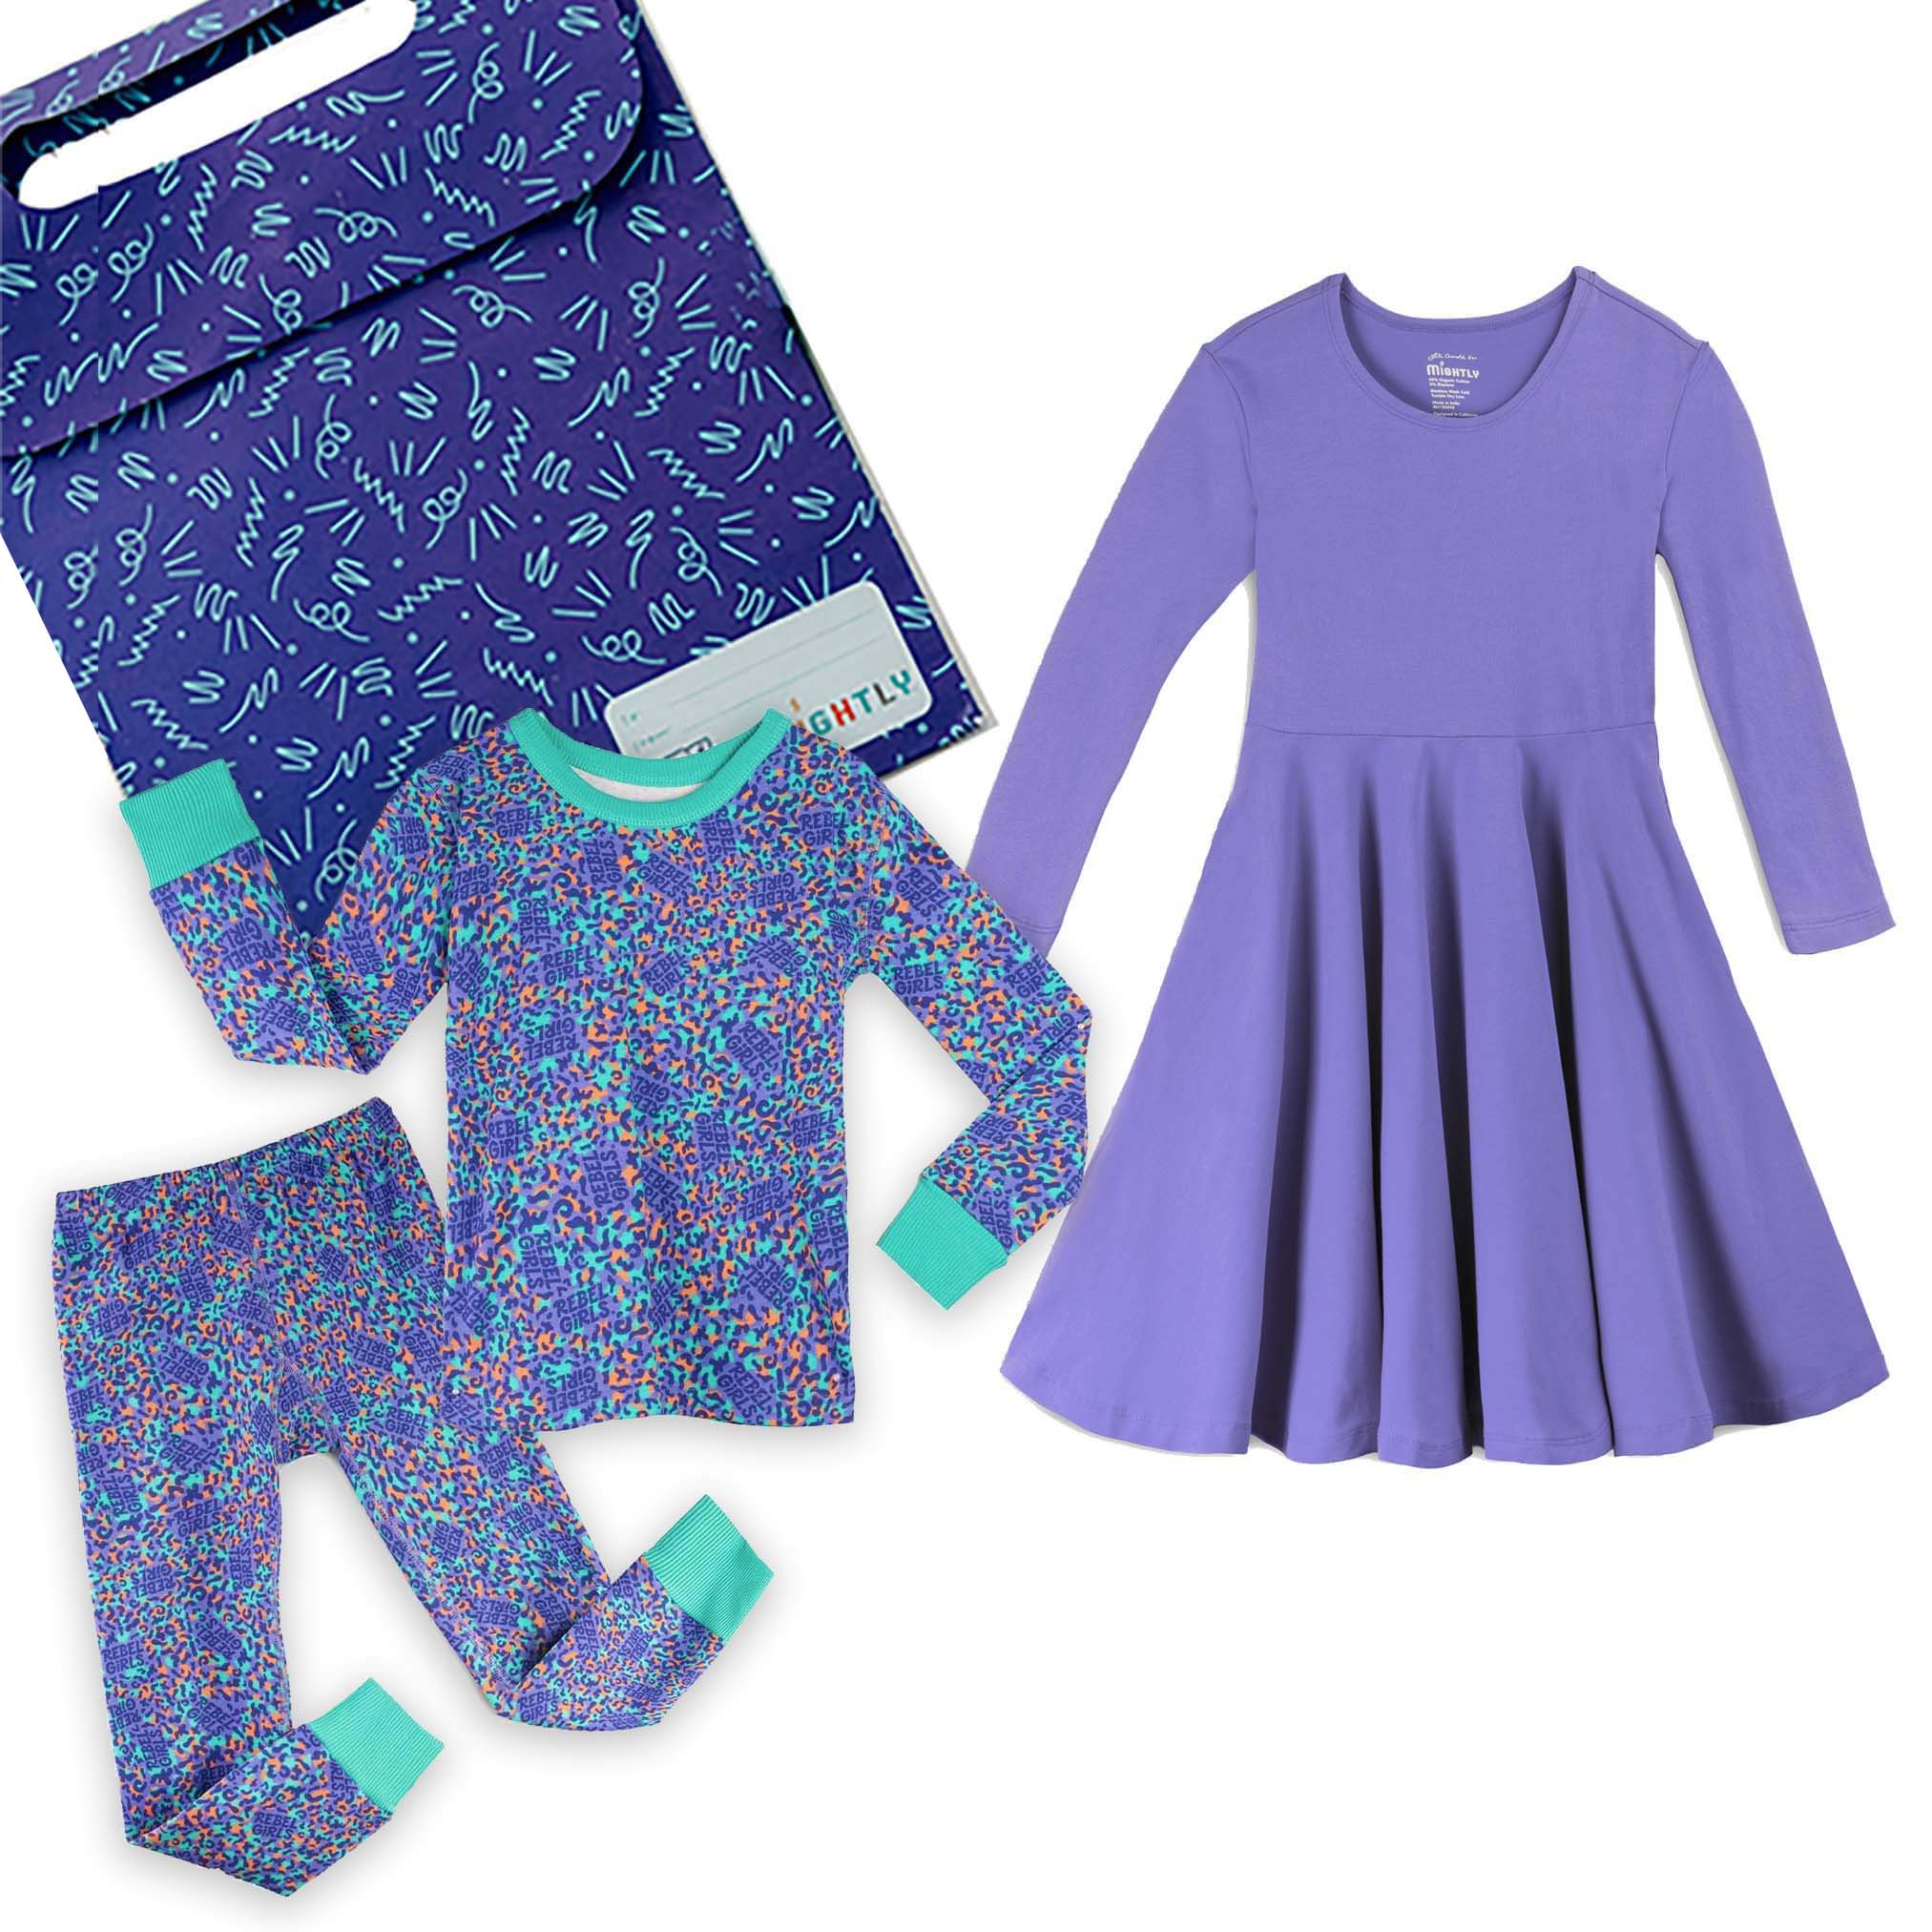 Cute and Cozy Gifts for Little Girls: 2-Piece Pajama Set with Twirl Dress